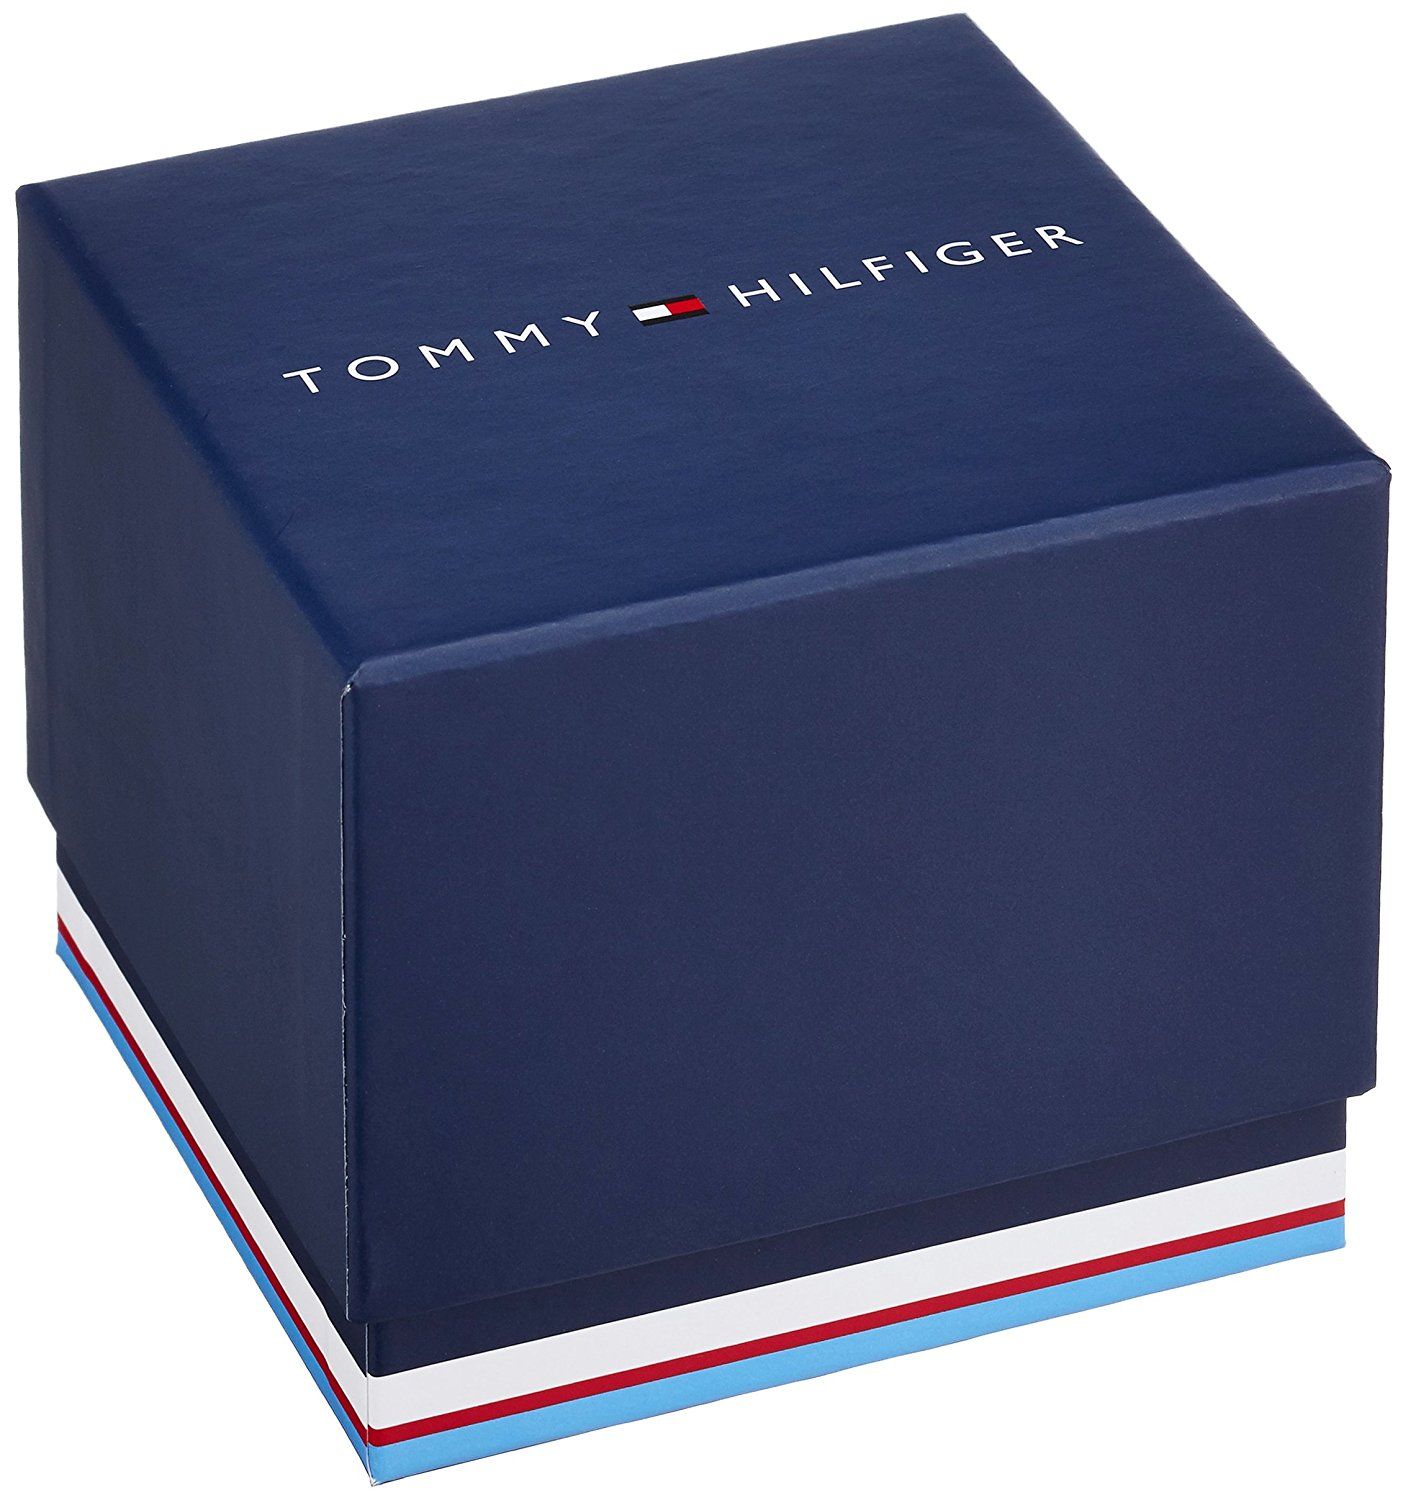 This Tommy Hilfiger Matthew Multi Dial Watch for Men is the perfect timepiece to wear or to gift. It's Silver 44 mm Round case combined with the comfortable Silver Stainless steel watch band will ensure you enjoy this stunning timepiece without any compromise. Operated by a high quality Quartz movement and water resistant to 5 bars, your watch will keep ticking. The classic colours will go great with any outfit . It enables you to easily spice up a normal outfit and add style to your life. -The watch has a calendar function: Day-Date, 24-hour Display High quality 21 cm length and 21 mm width Silver Stainless steel strap with a Fold over with push button clasp Case diameter: 44 mm,case thickness: 11 mm, case colour: Silver and dial colour: Grey